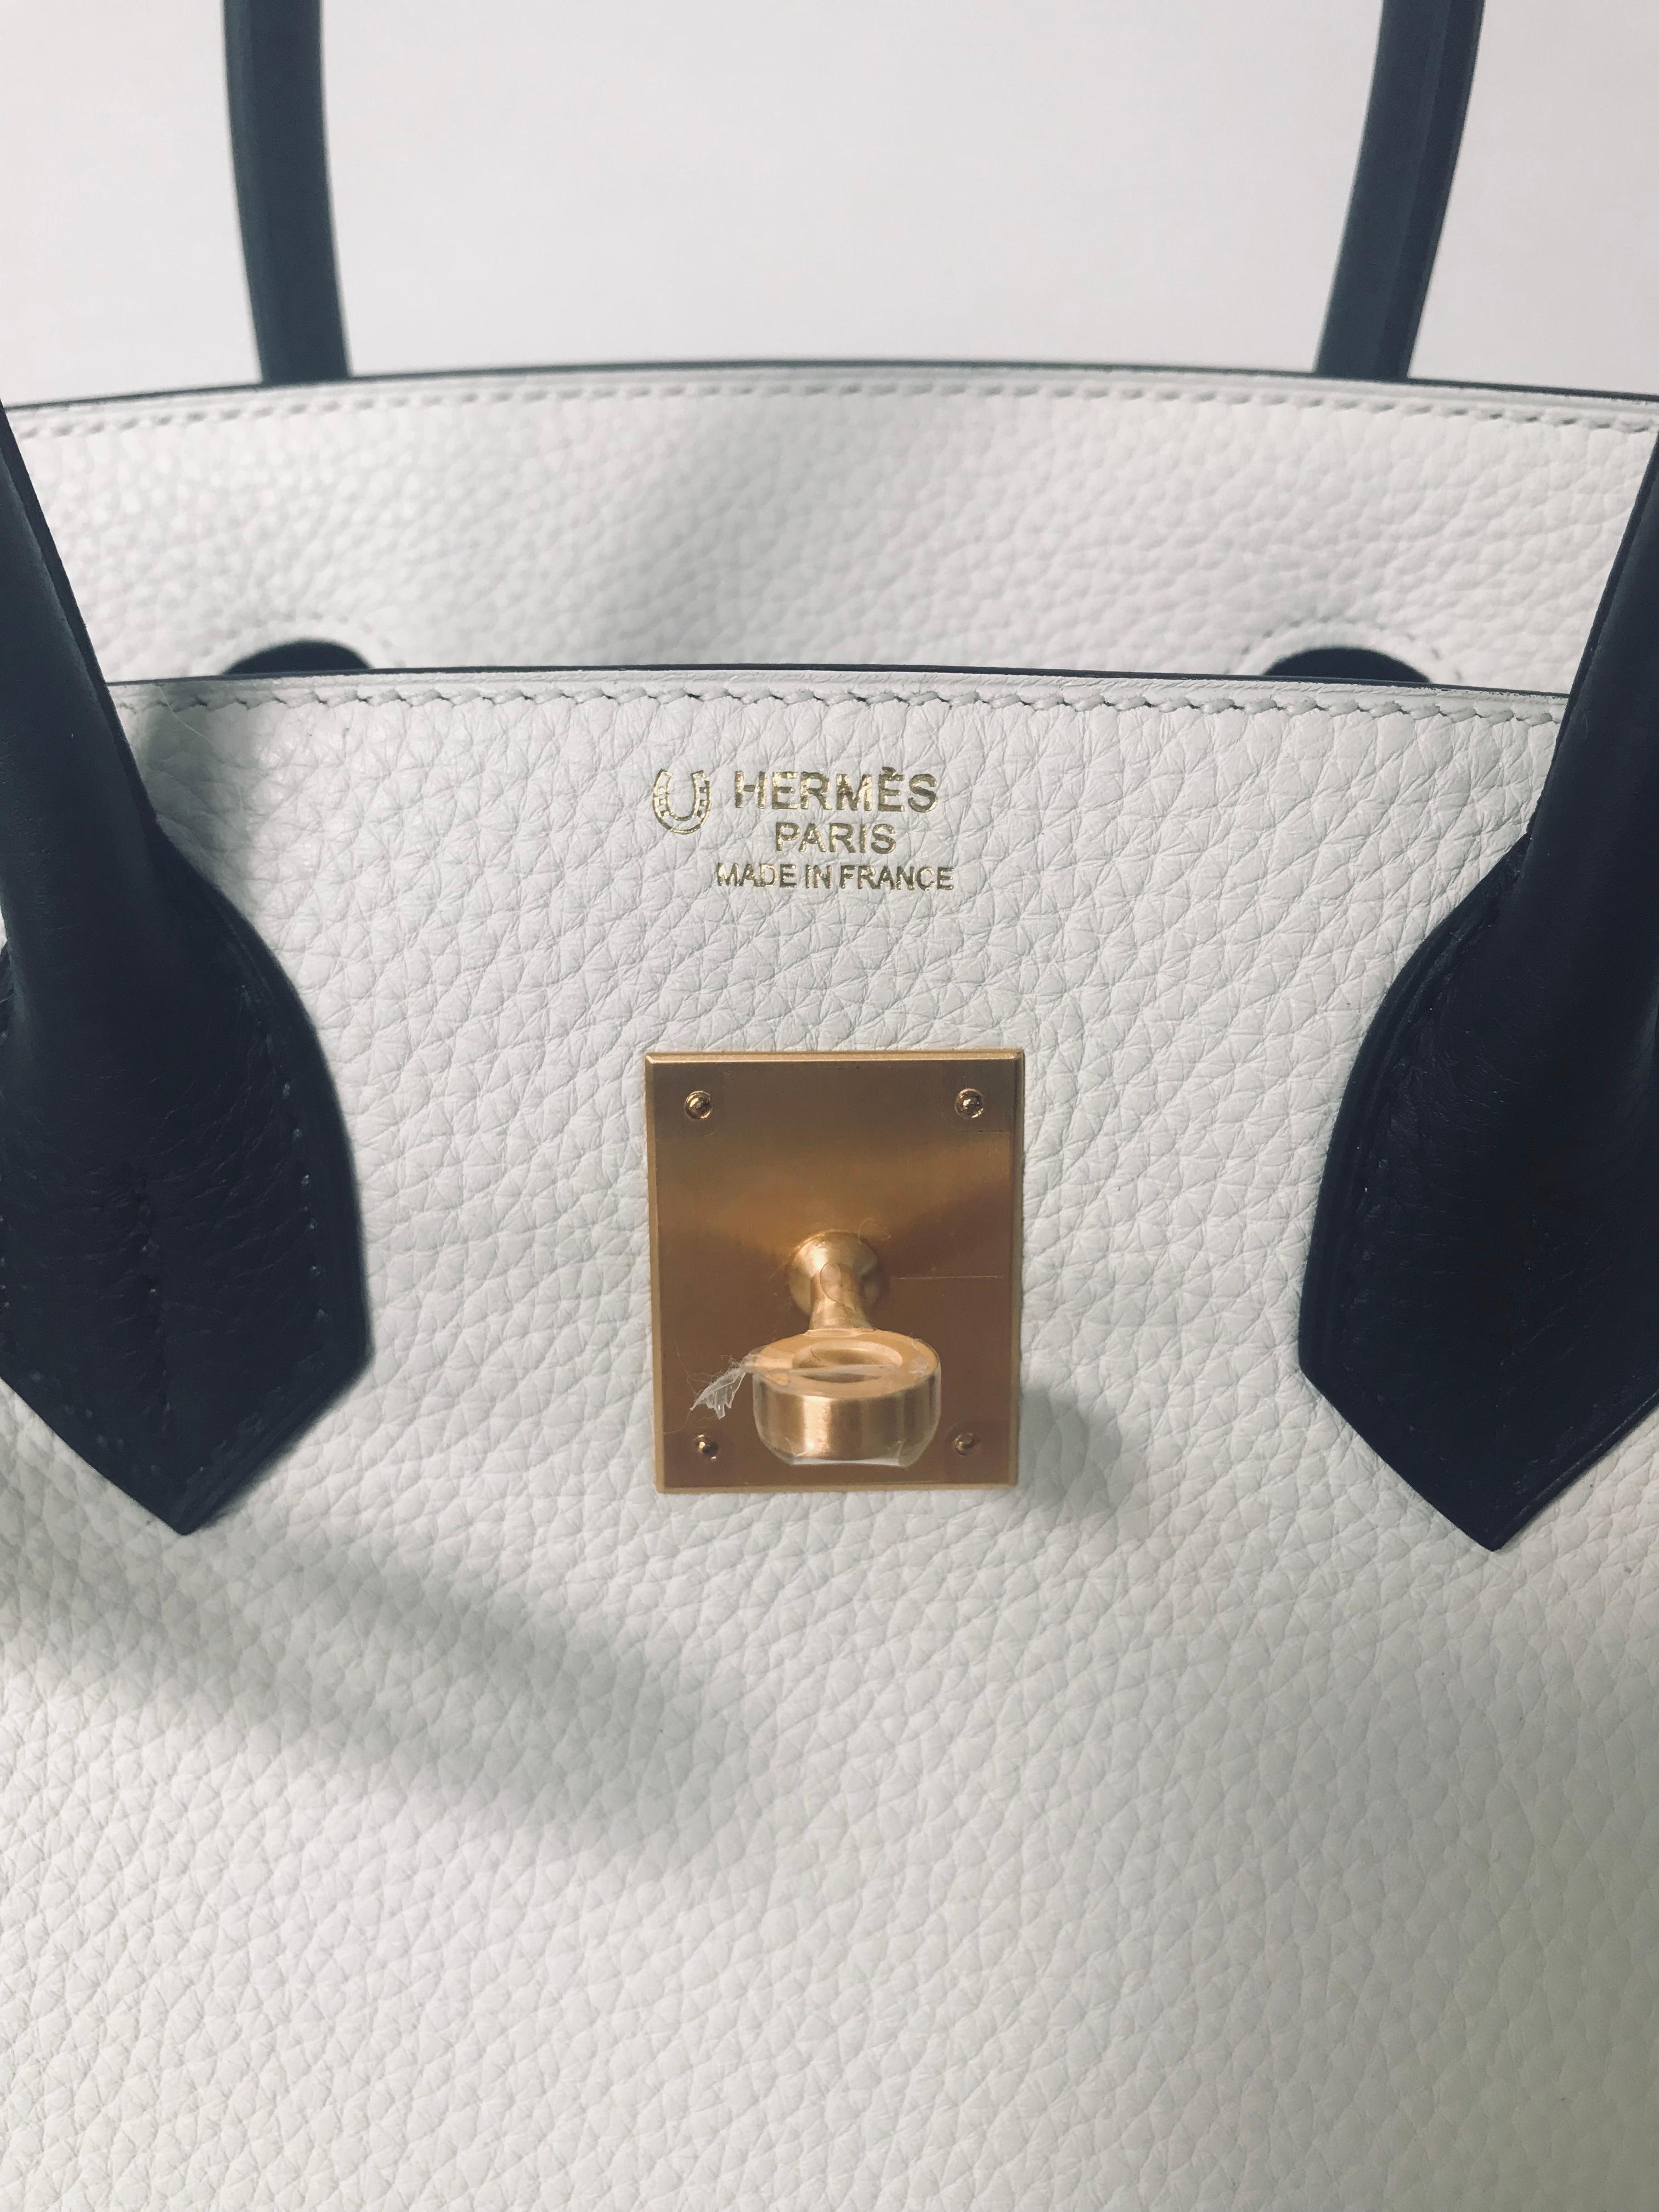 Special Order Birkin in 30cm
Hermes Horseshoe Stamp (HSS) Birkin 30cm
 Black and white clemence leather with brushed gold hardware.
Collection C

RARE, special order in Black and White, almost impossible to find especially with brushed gold!

This